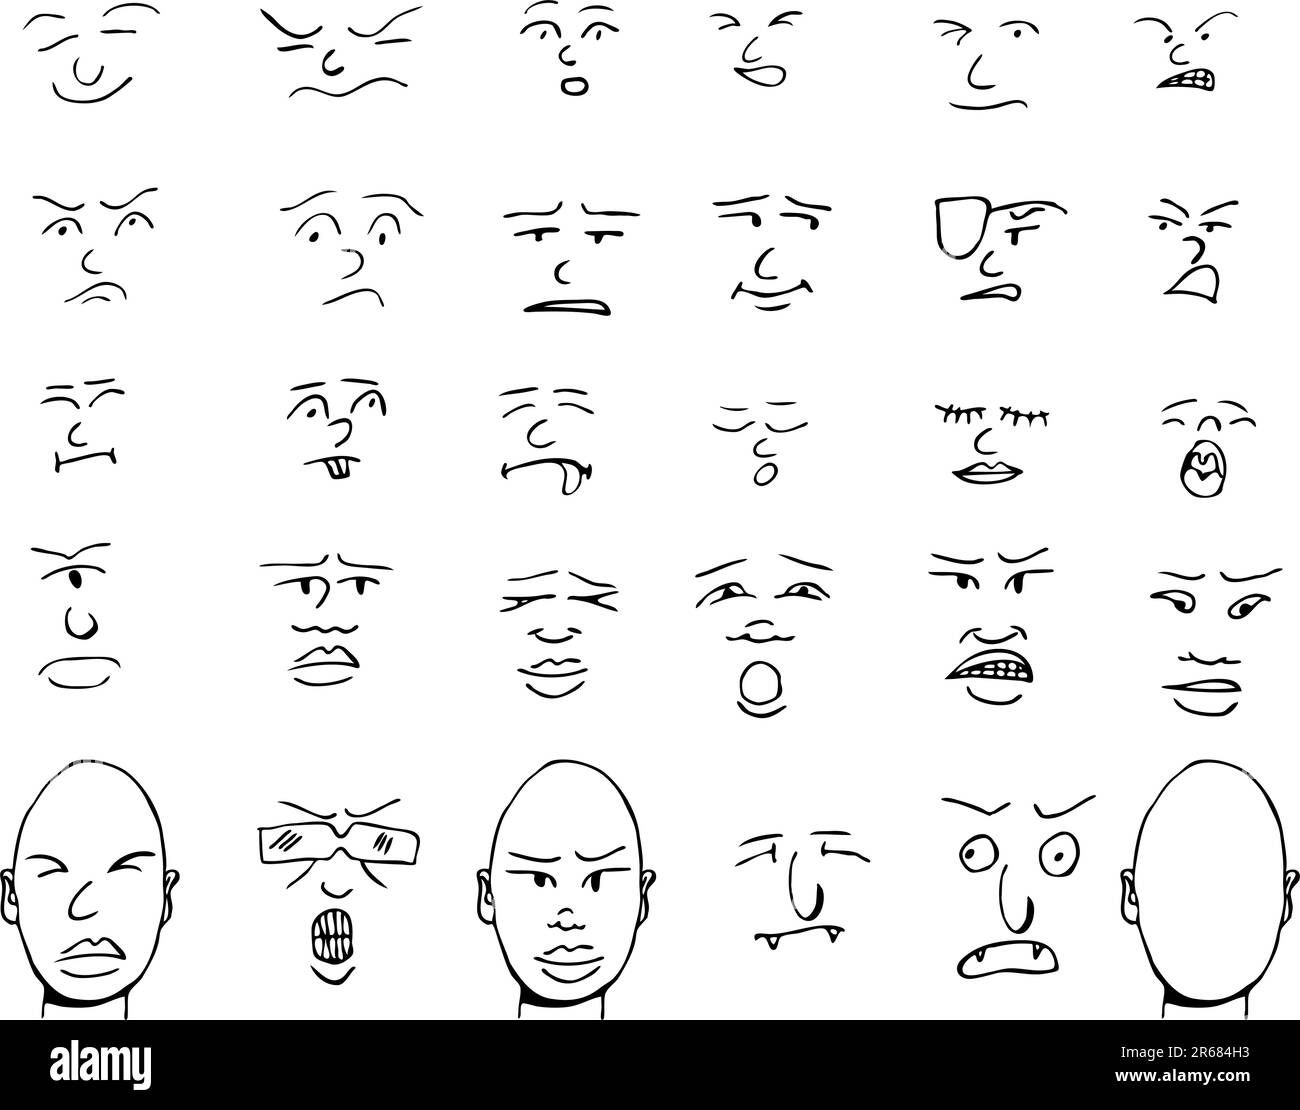 Set of human and fantasy faces and matching heads with various expressions. Stock Vector